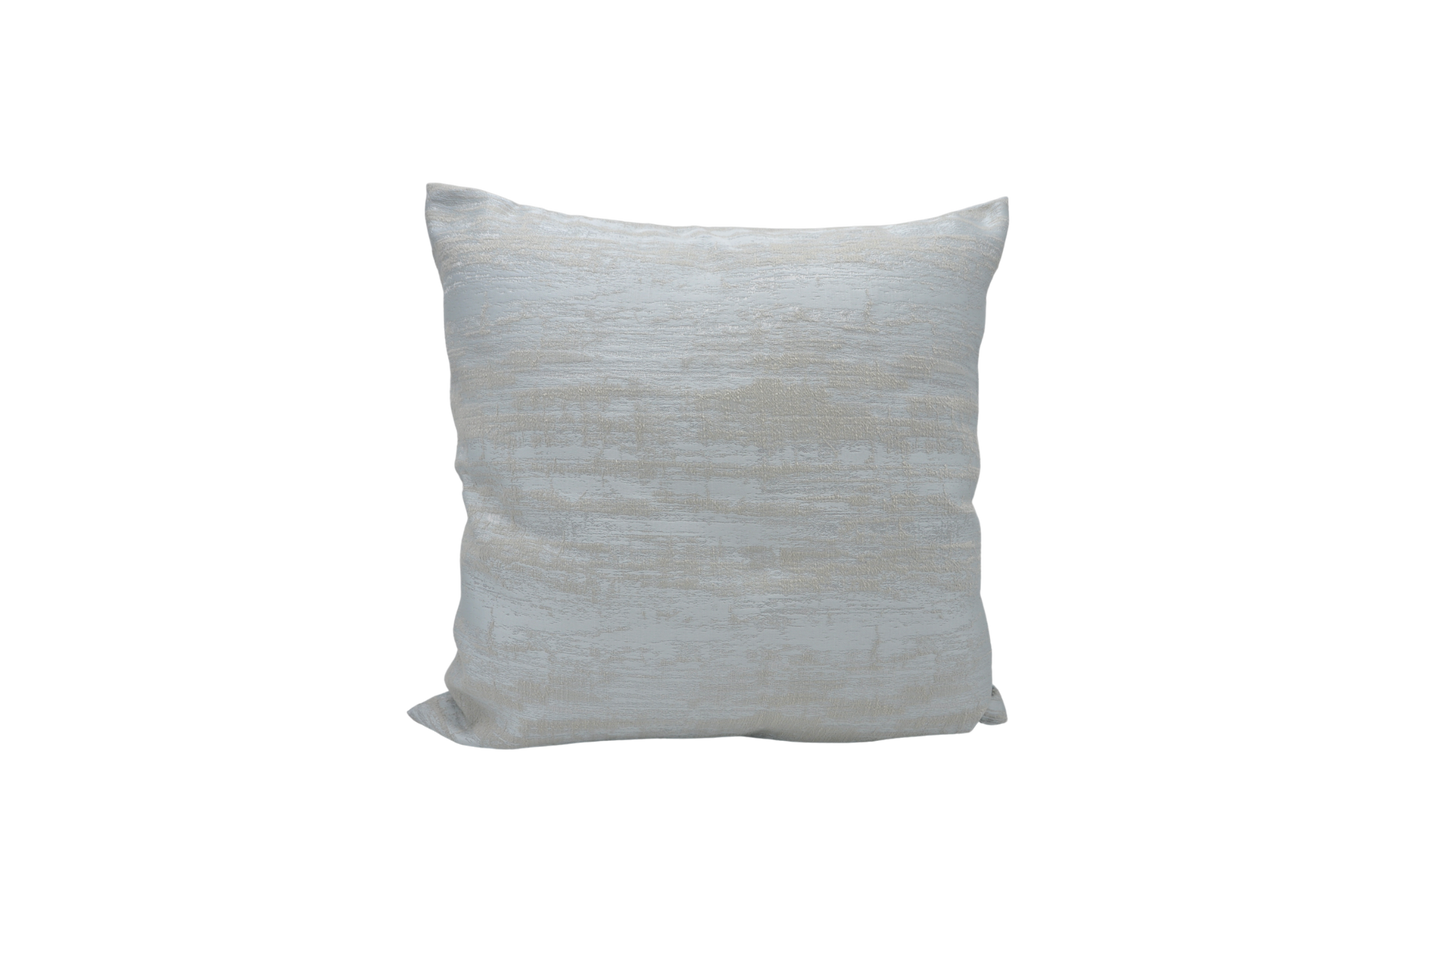 Blue Shimmer - Sustainable Décor Pillows